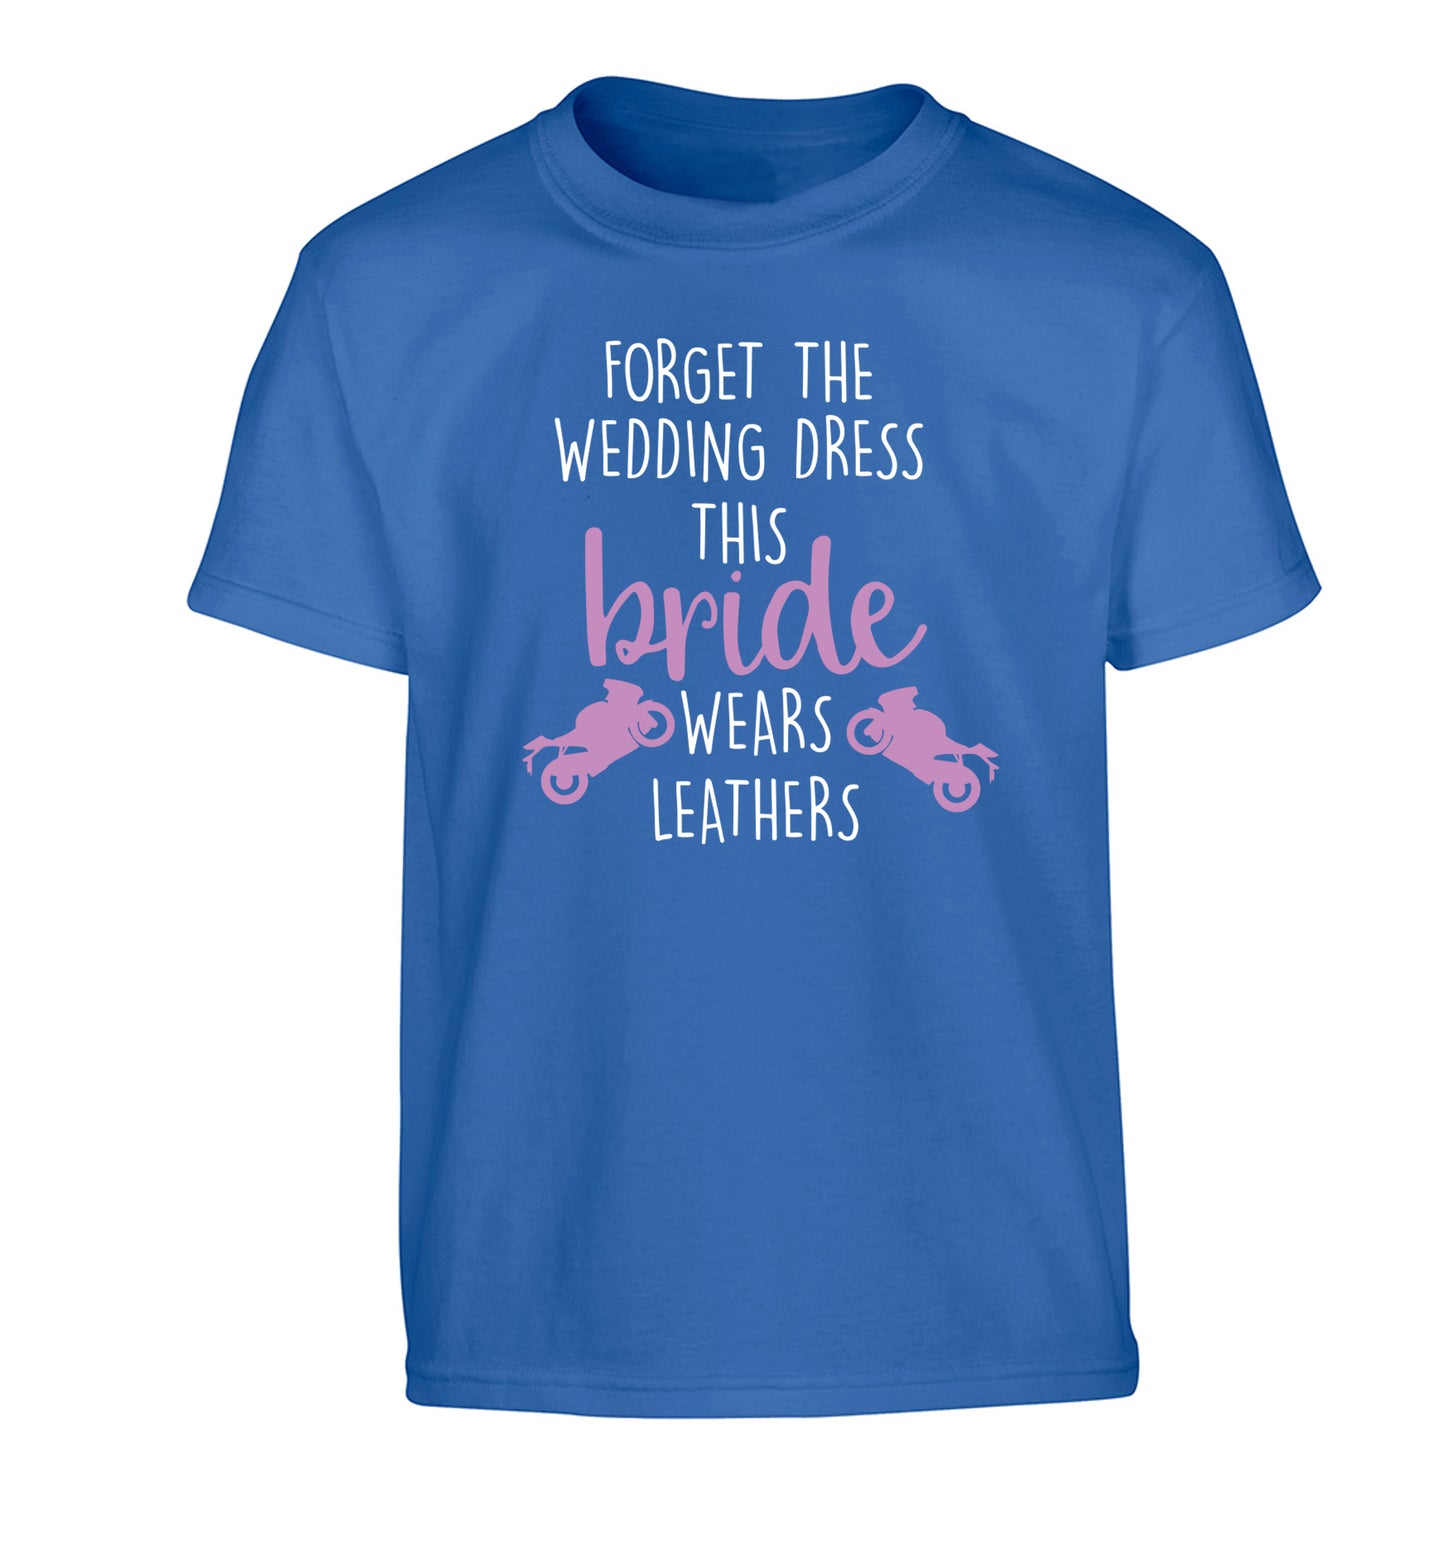 Forget the wedding dress this bride wears leathers Children's blue Tshirt 12-13 Years